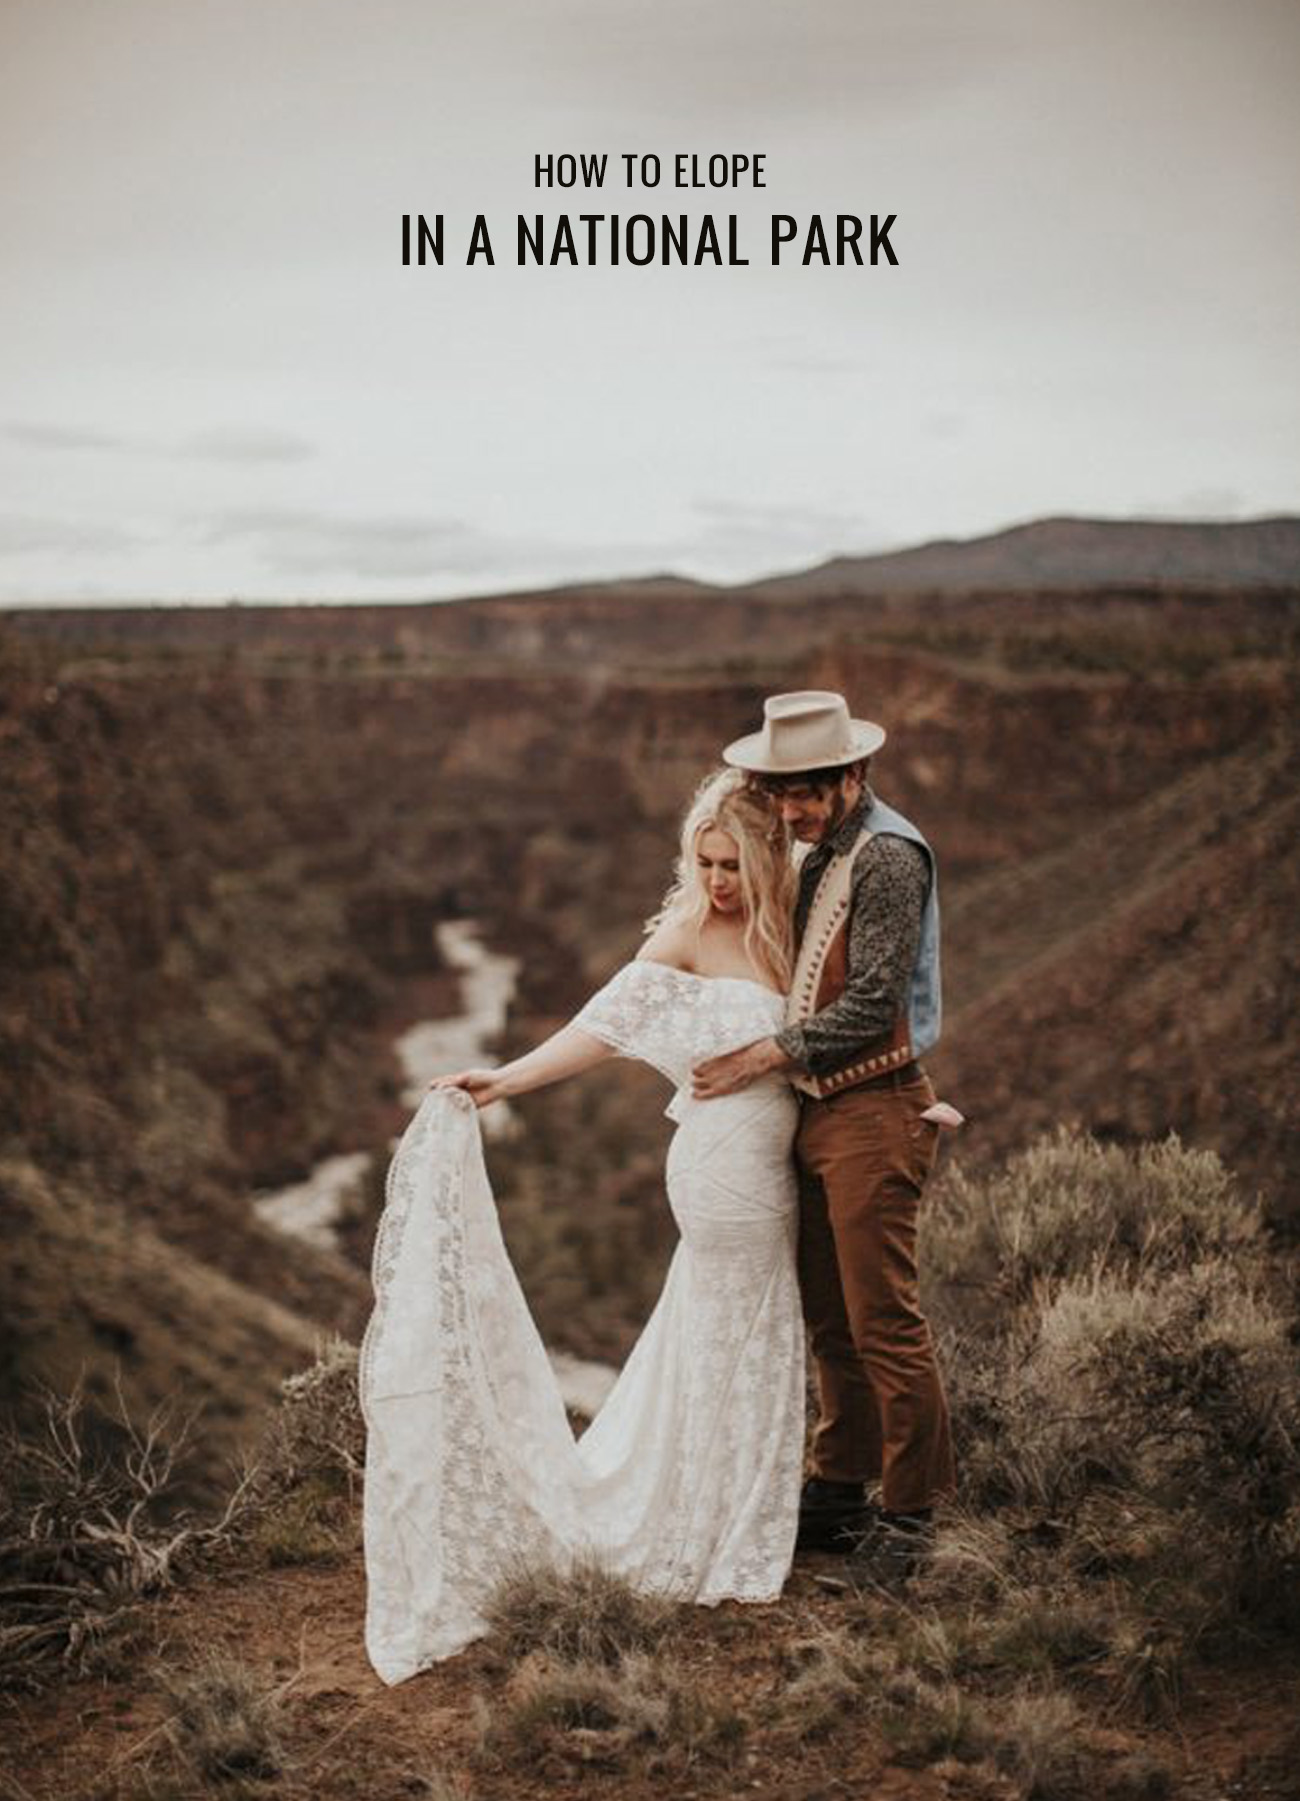 How to Elope in a National Park